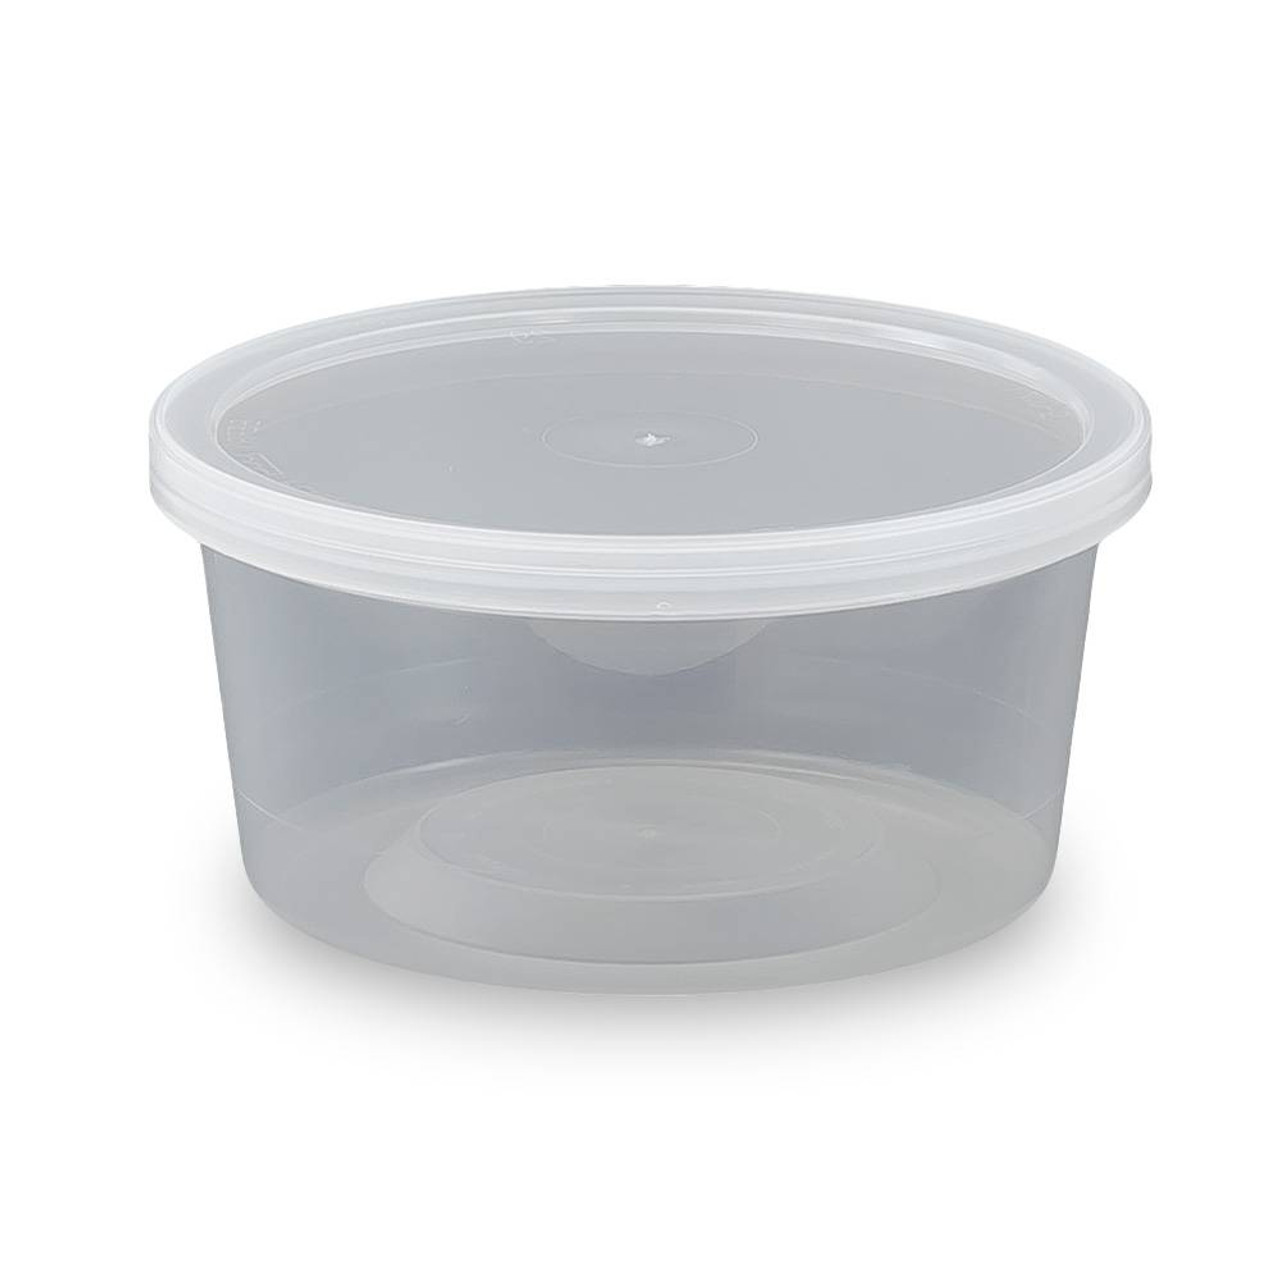 32 oz. BPA Free Food Grade Round Container with Lid (T60232CA) - starting  quantity 25 count - FREE SHIPPING